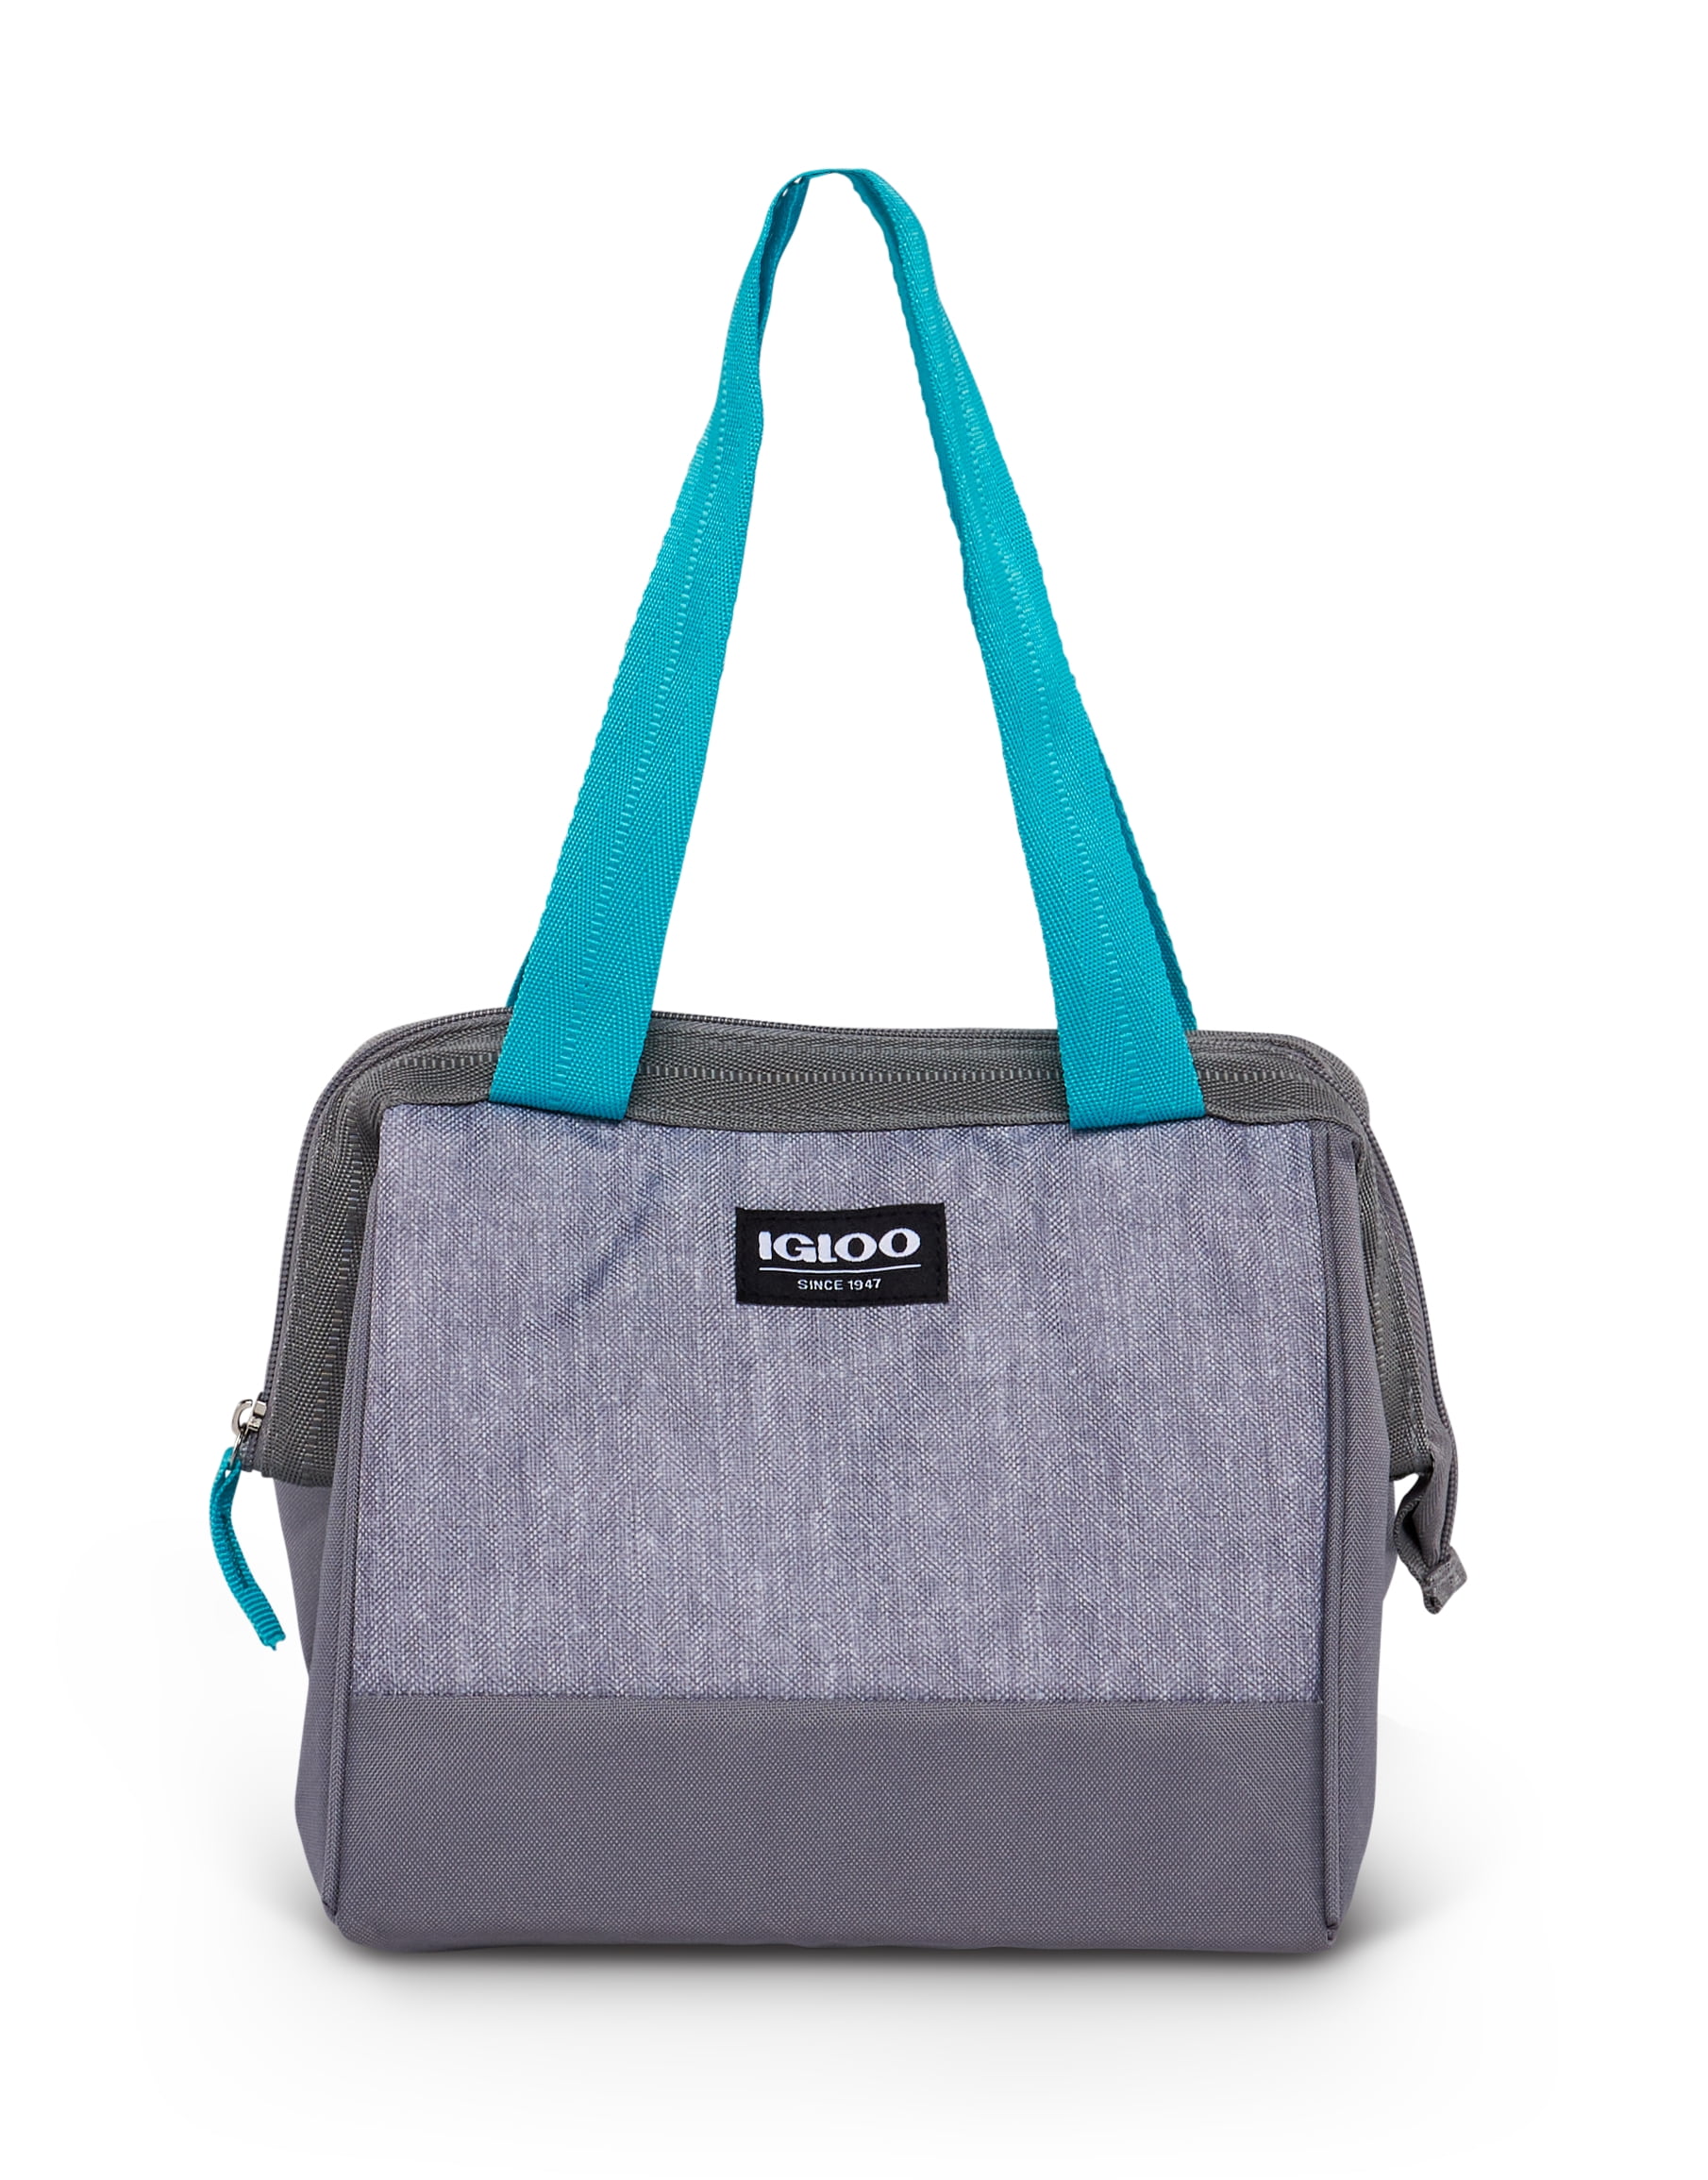 Igloo Cooler Insulated Tote Bag 8 Cans Capacity 